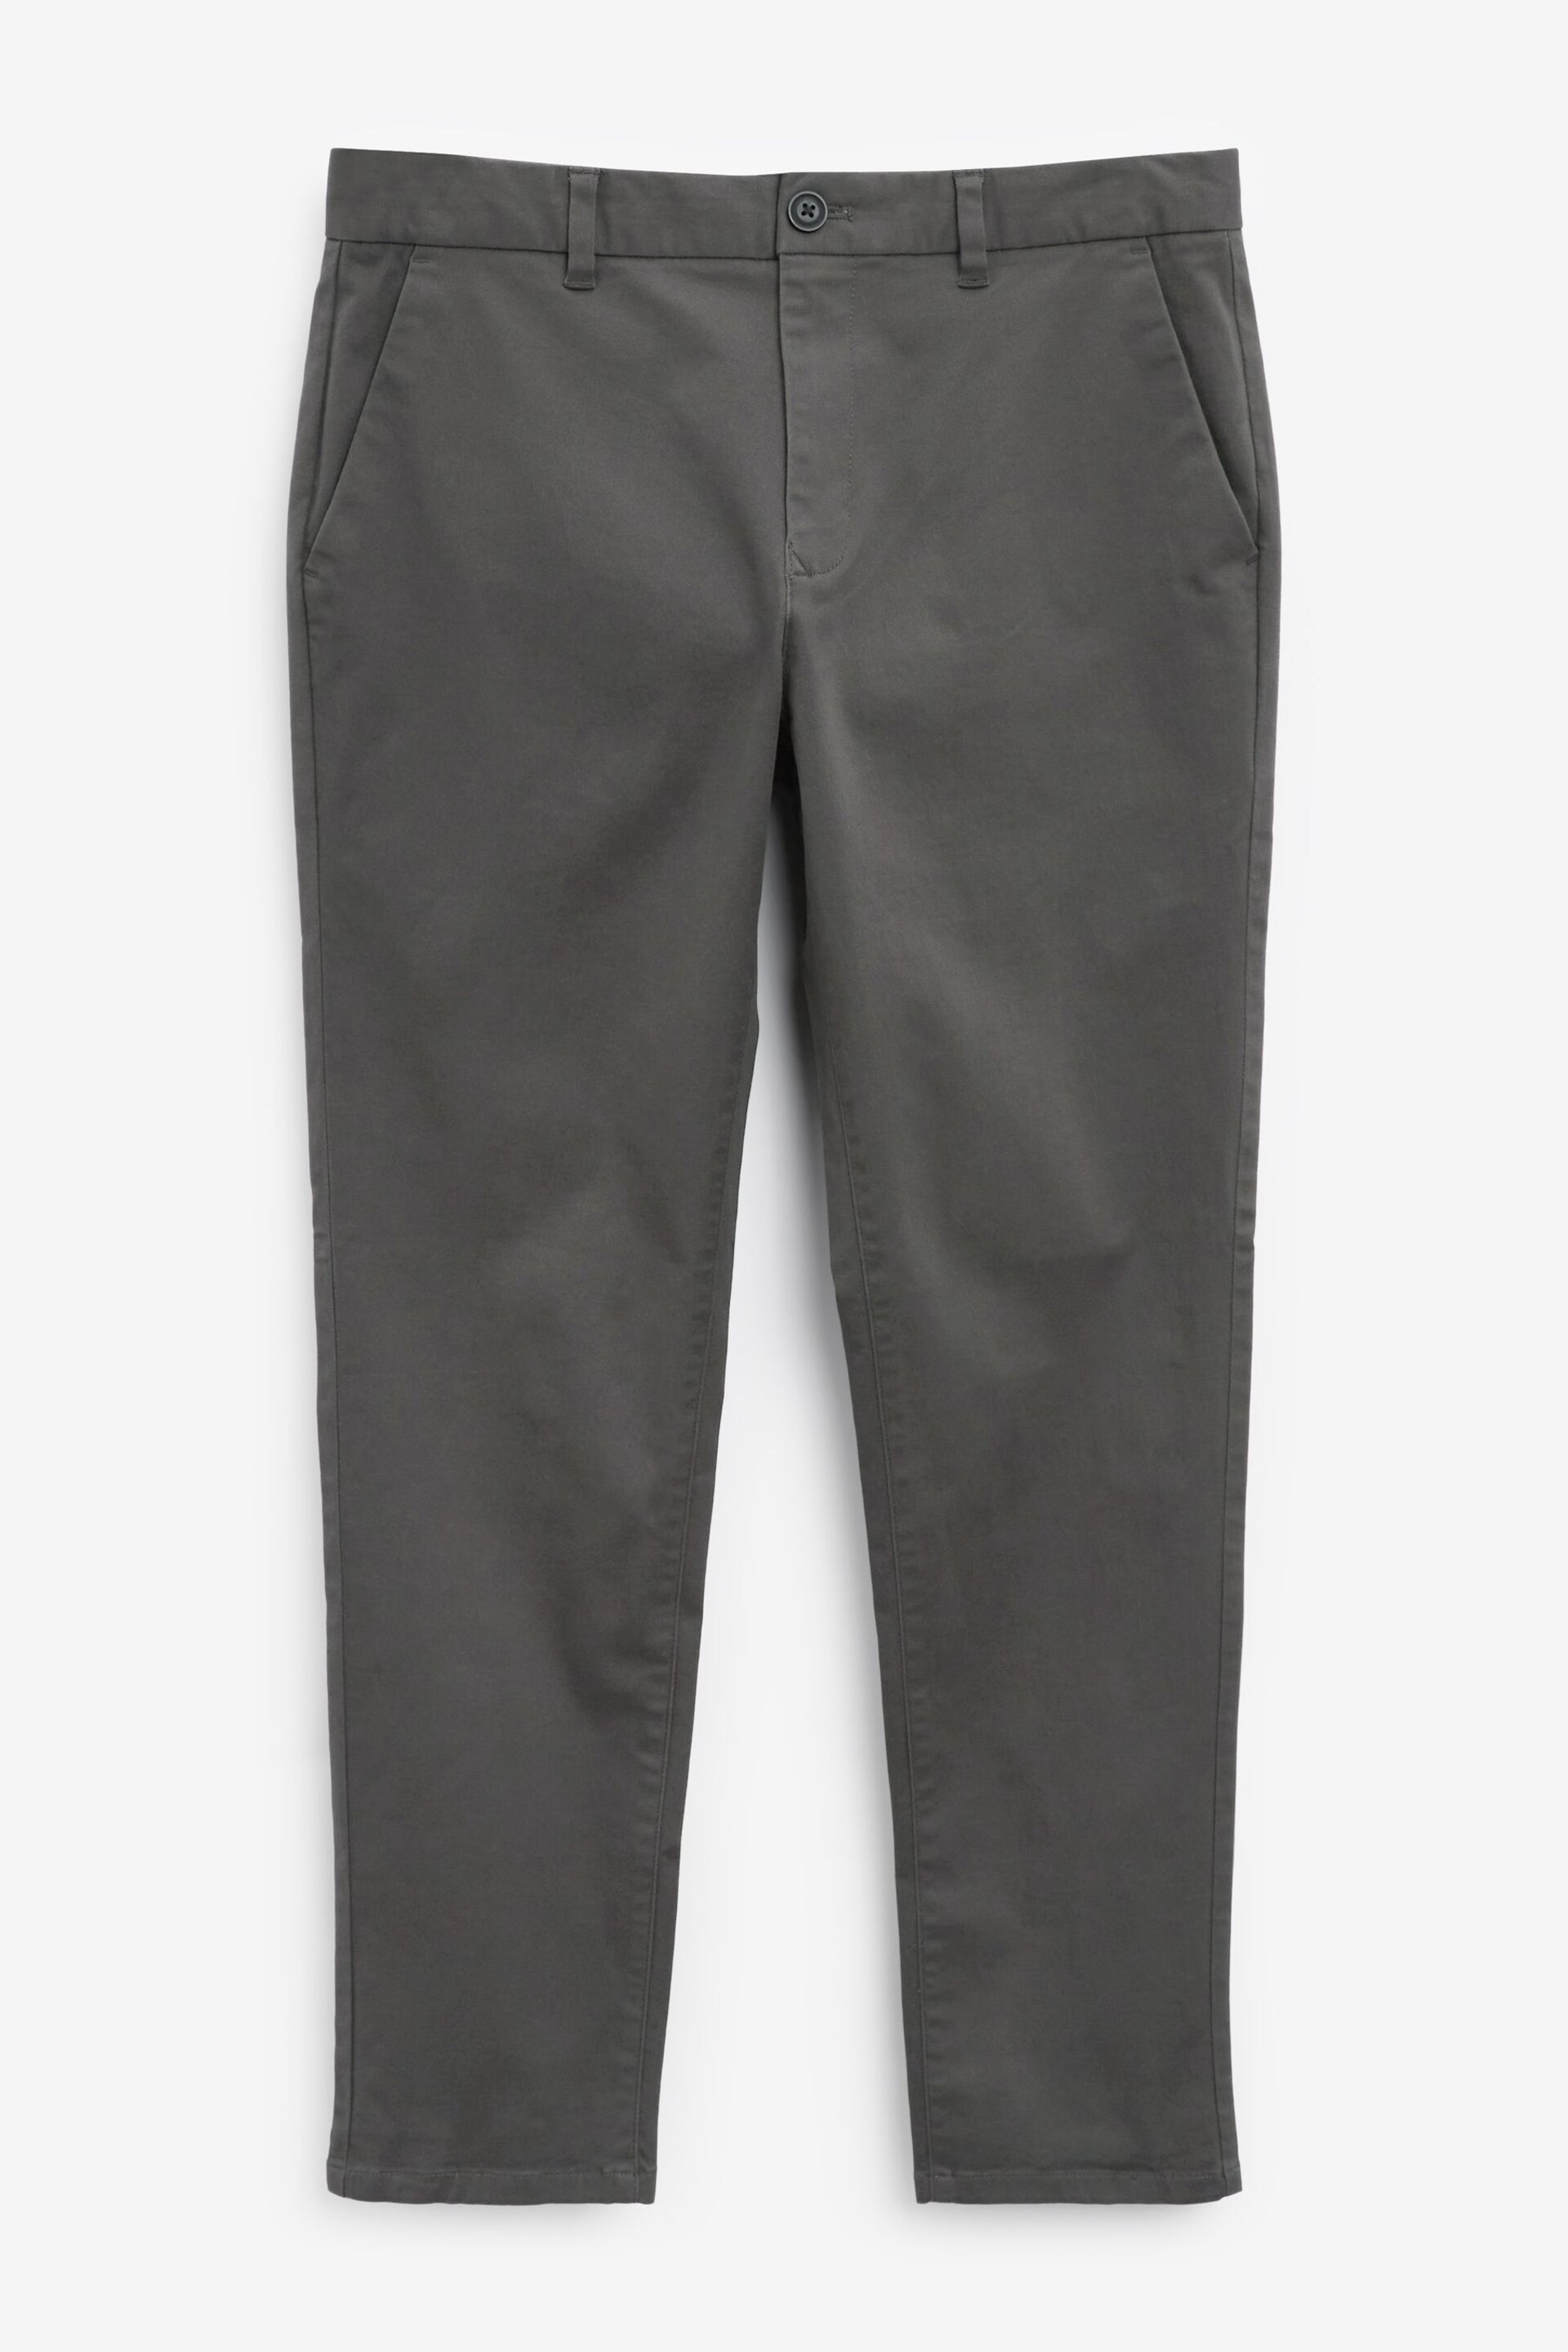 Dark Grey Regular Tapered Fit Stretch Chino Trousers - Image 6 of 8